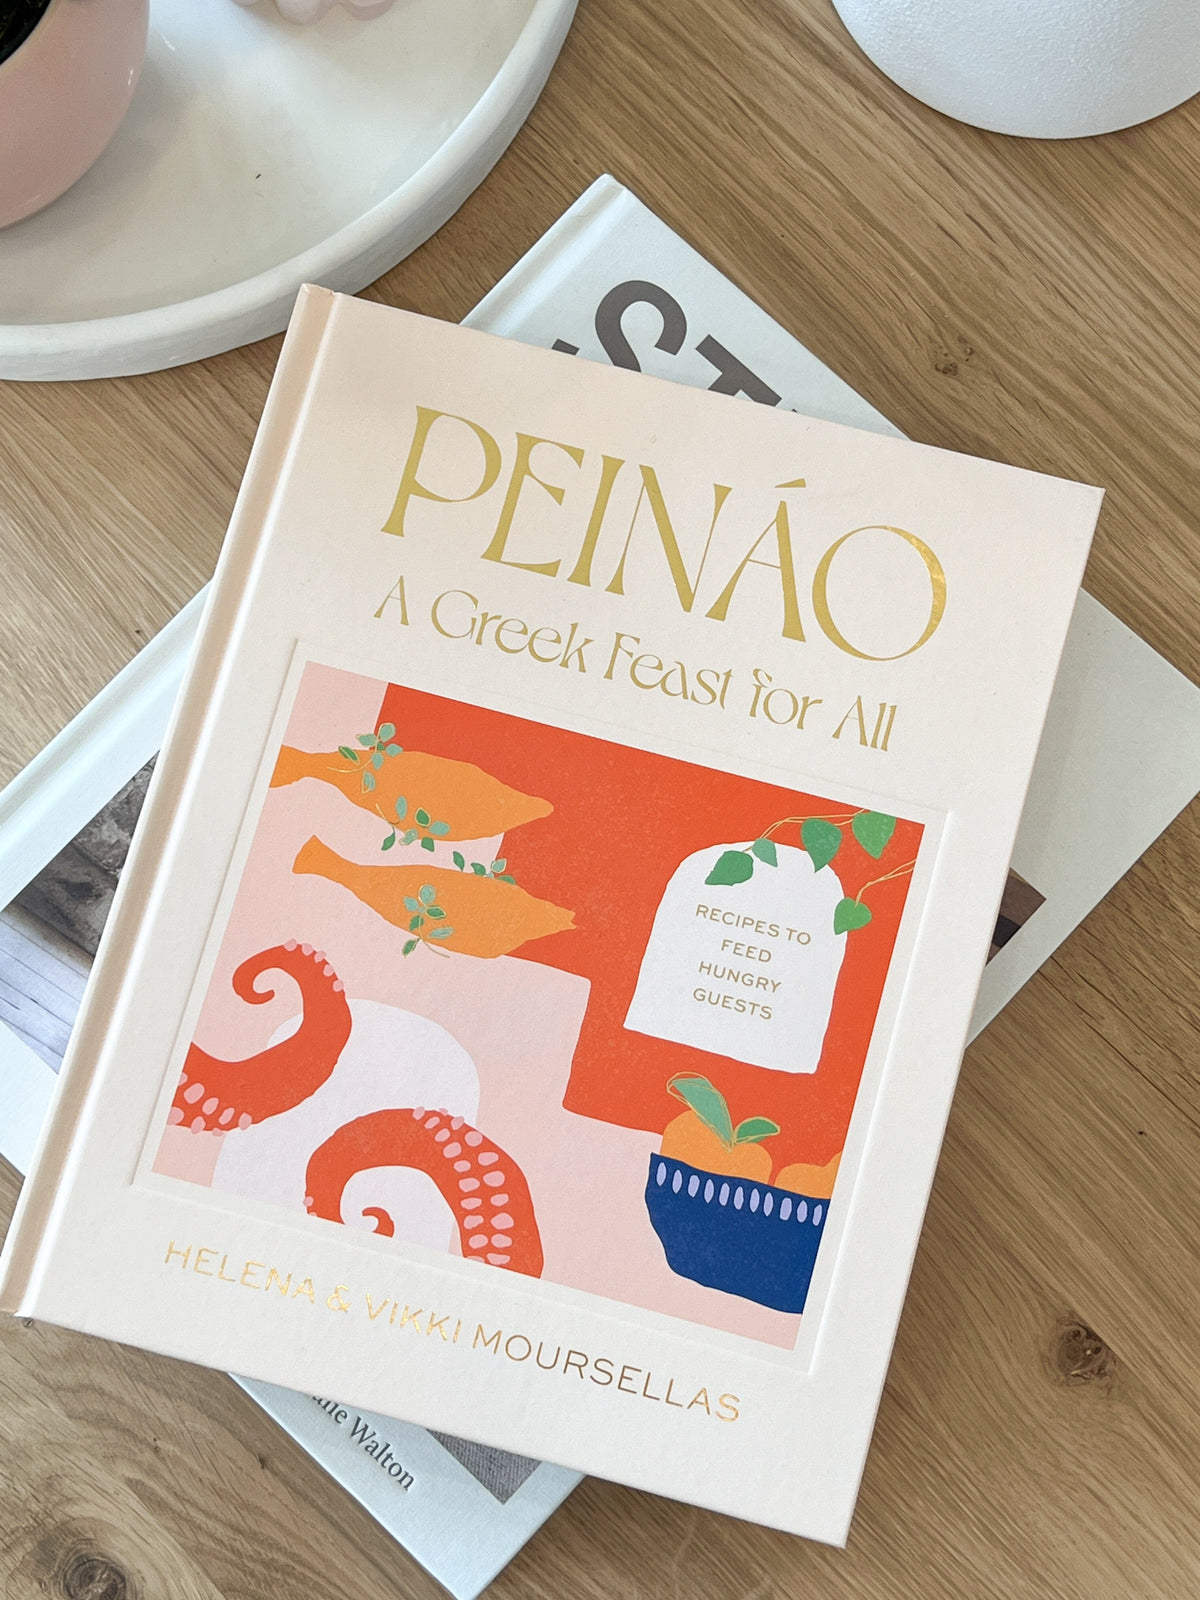 Brumby Sunstate Cook Peinao: A Greek Feast by Helena Moursellas and Vicki Moursellas